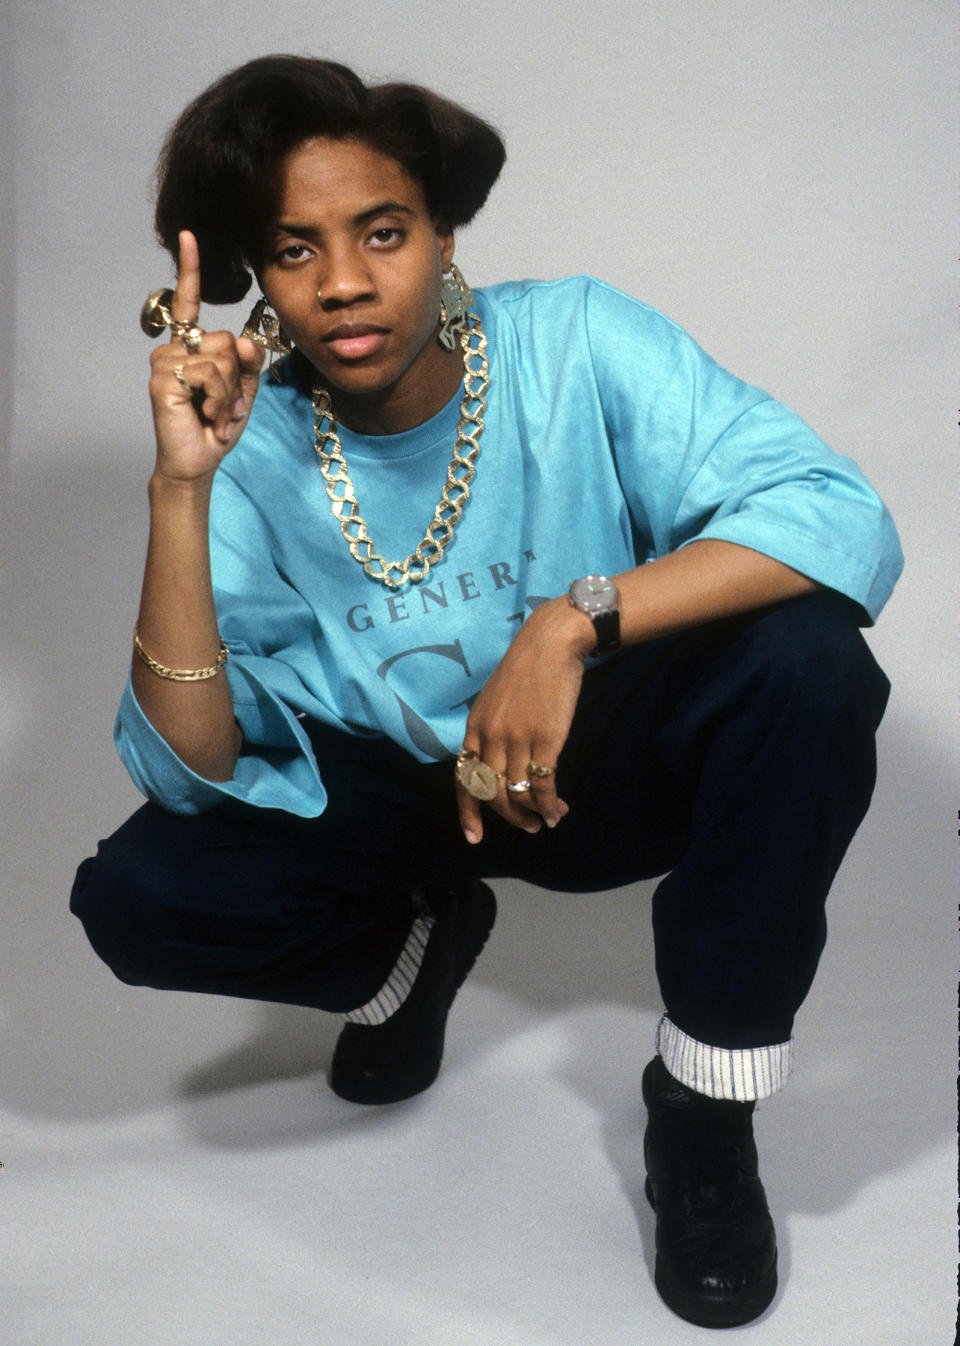 NEW YORK, NEW YORK--MAY 05--Rapper MC Lyte (aka Lana Moorer) appears in a portrait taken on May 5, 1989 in New York City.  (Photo by Al Pereira/Getty Images/Michael Ochs Archives).